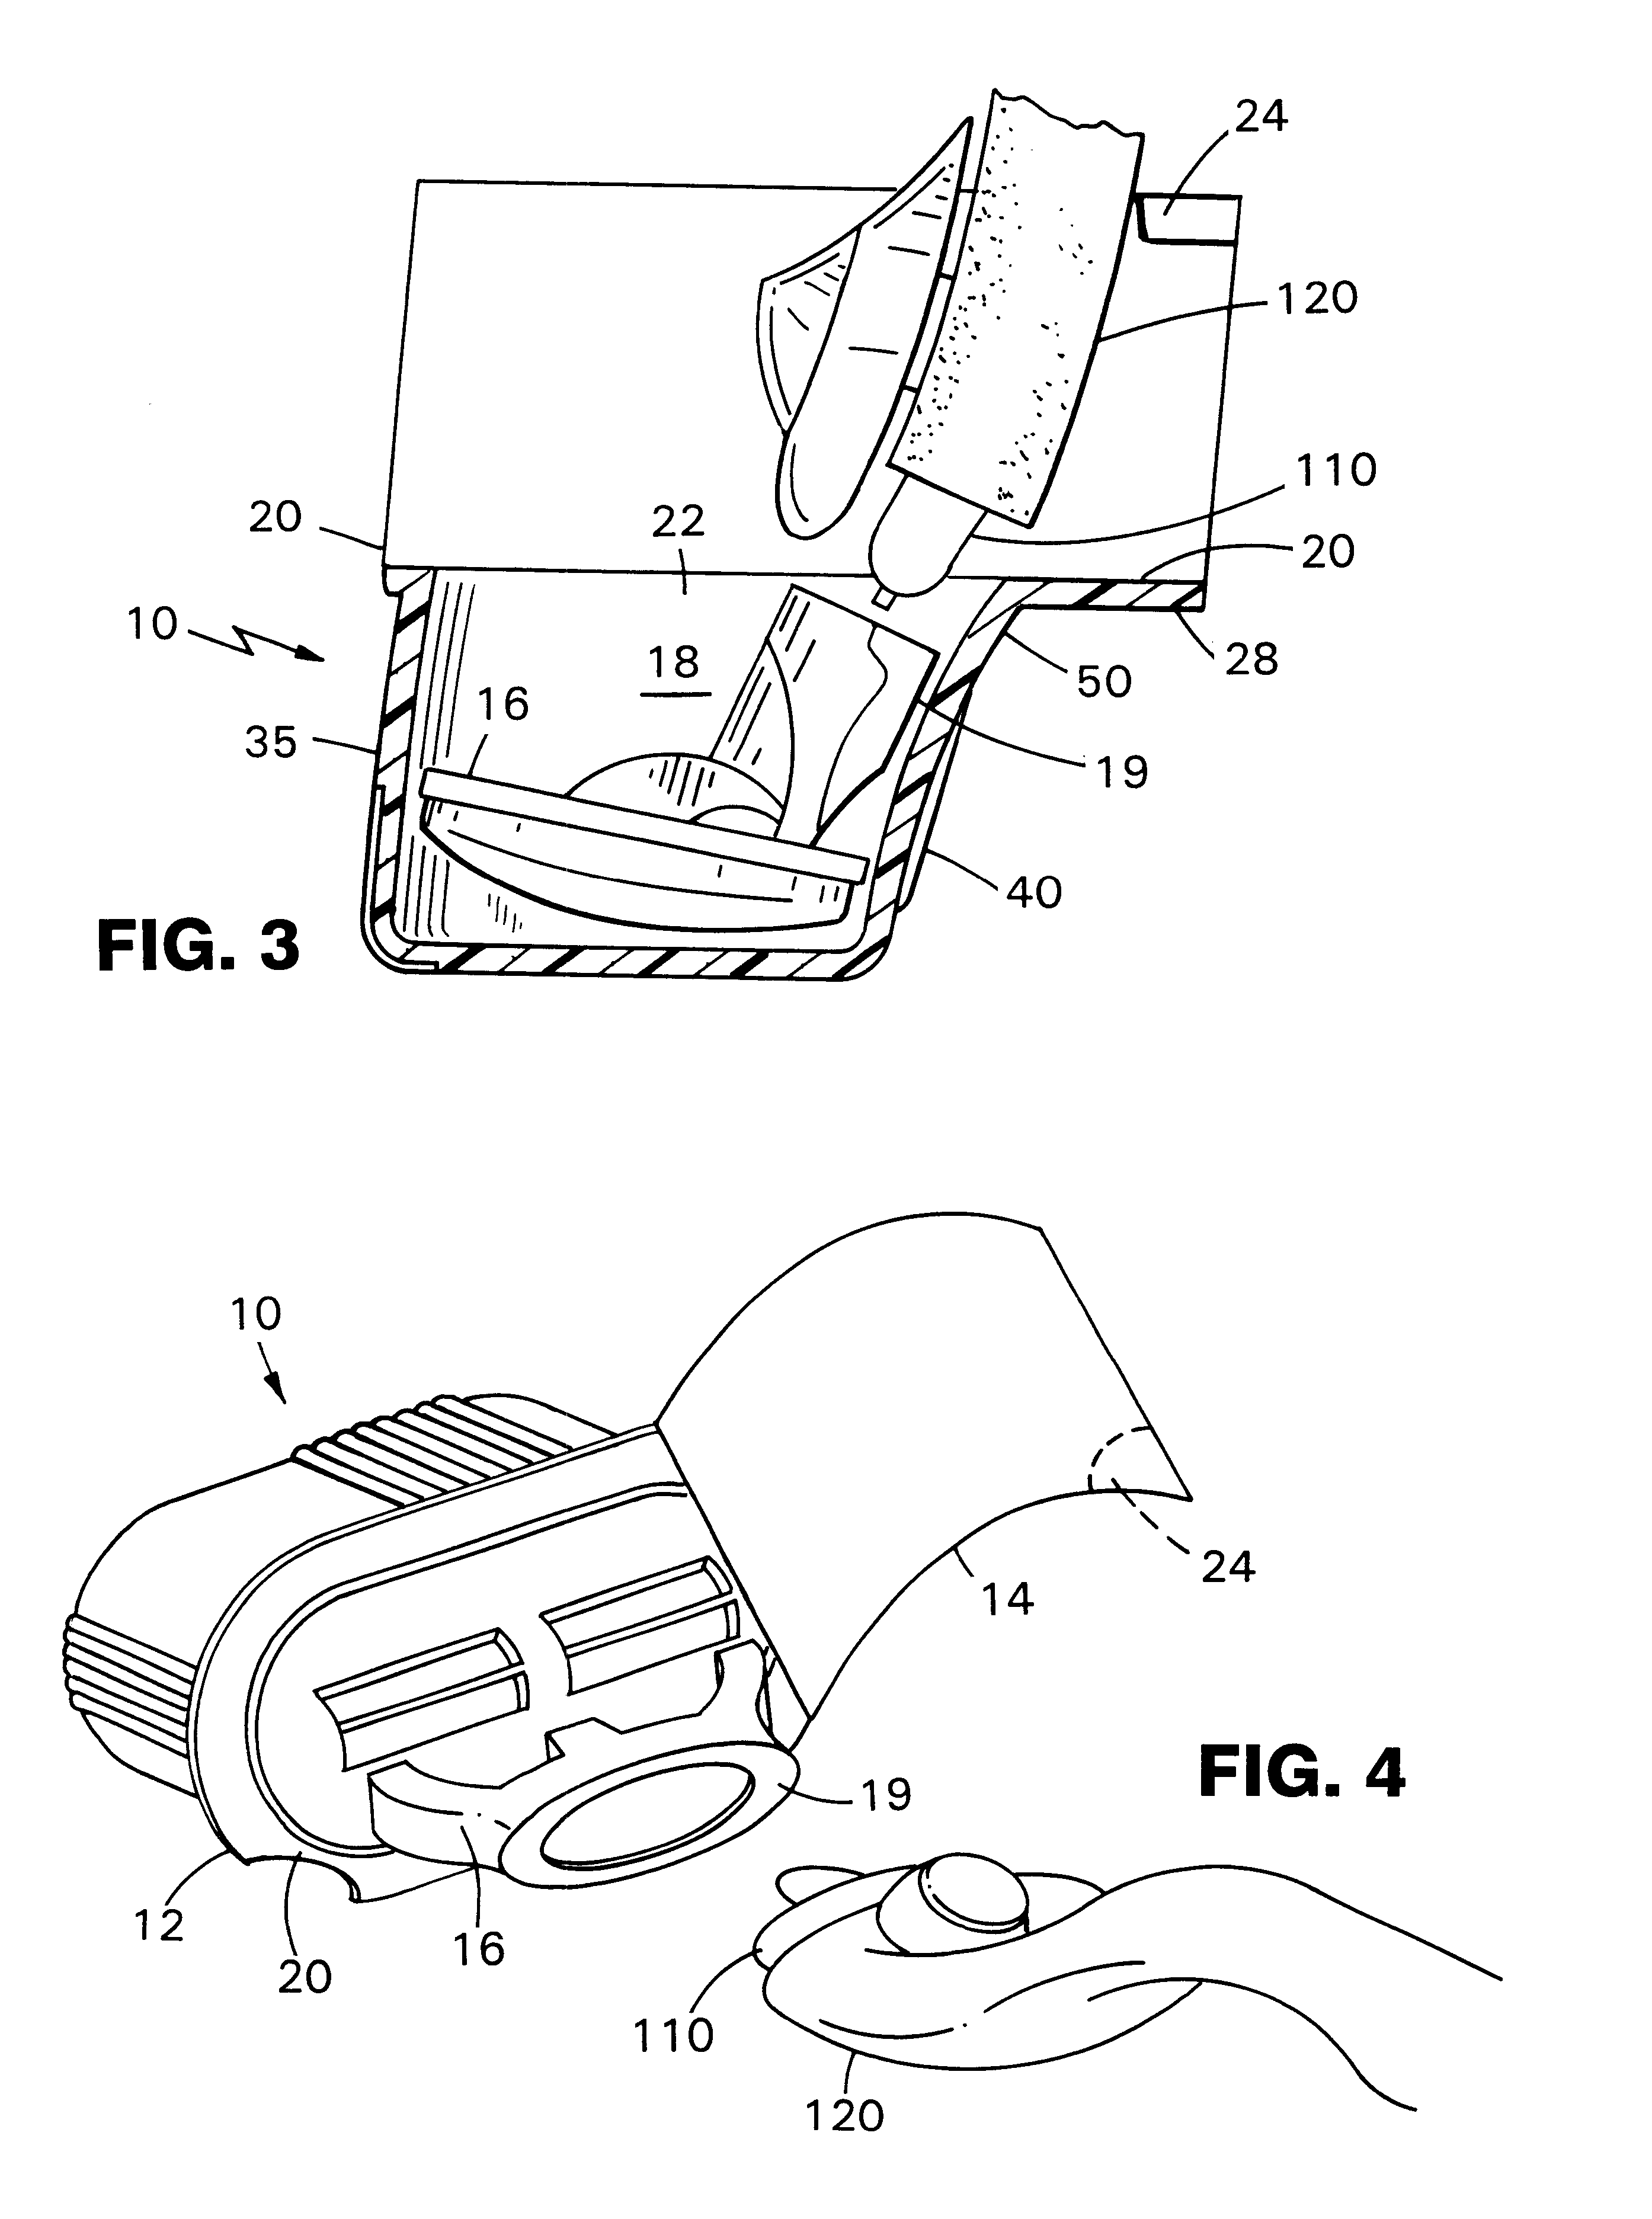 Sealed container for an article of personal use such as a razor cartridge